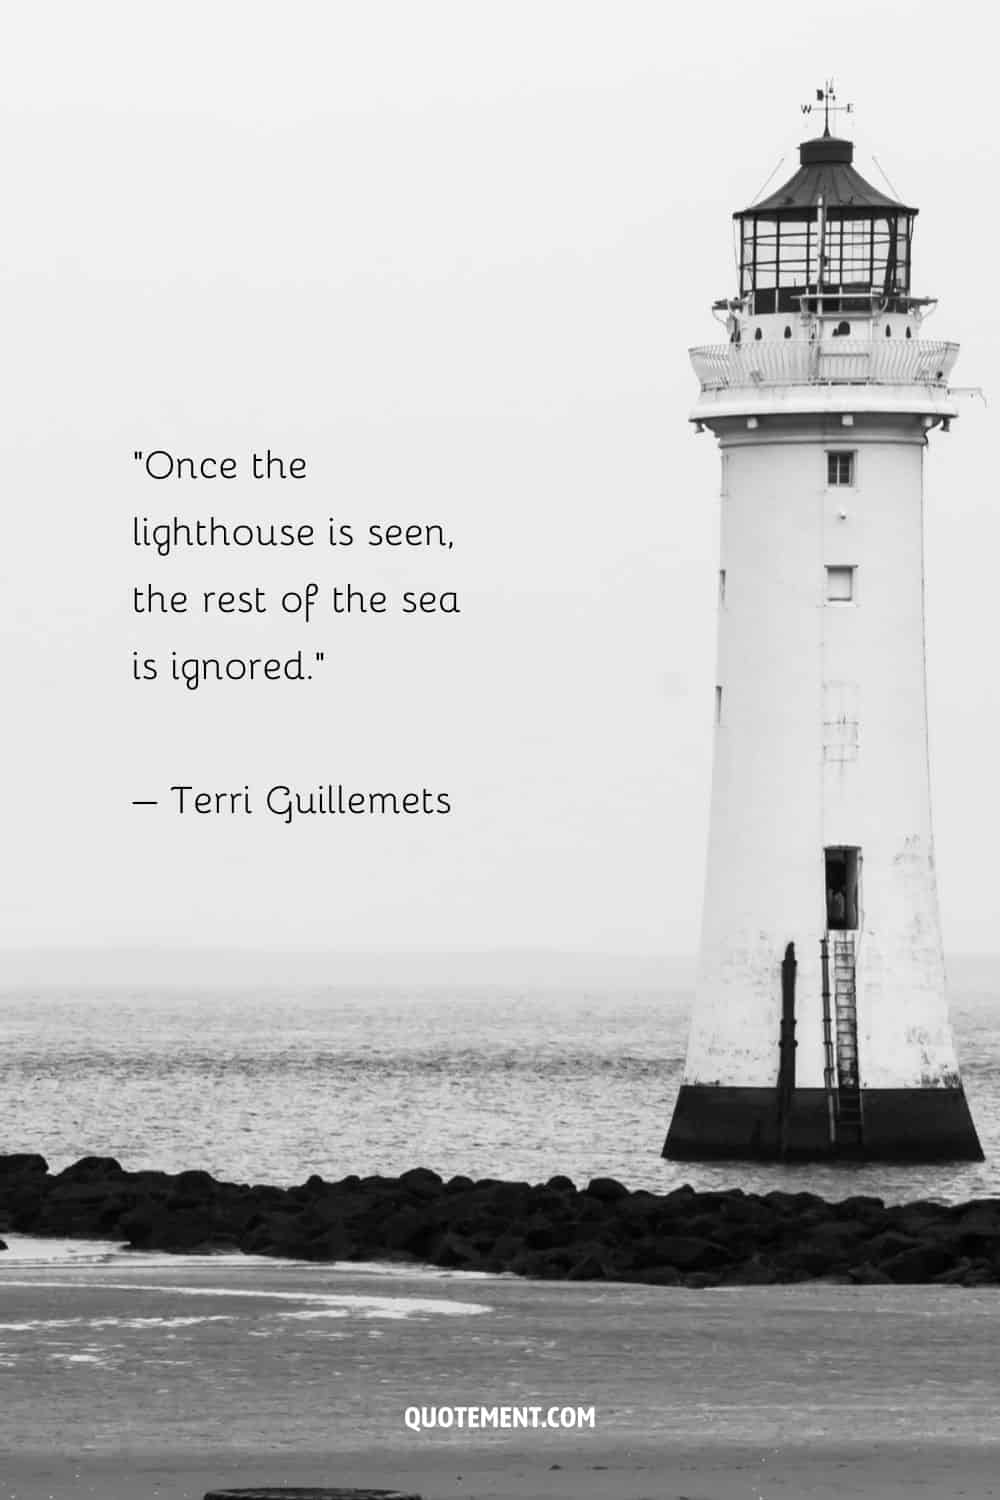 Deep quote by Terri Guillemets and a lighthouse in black and white